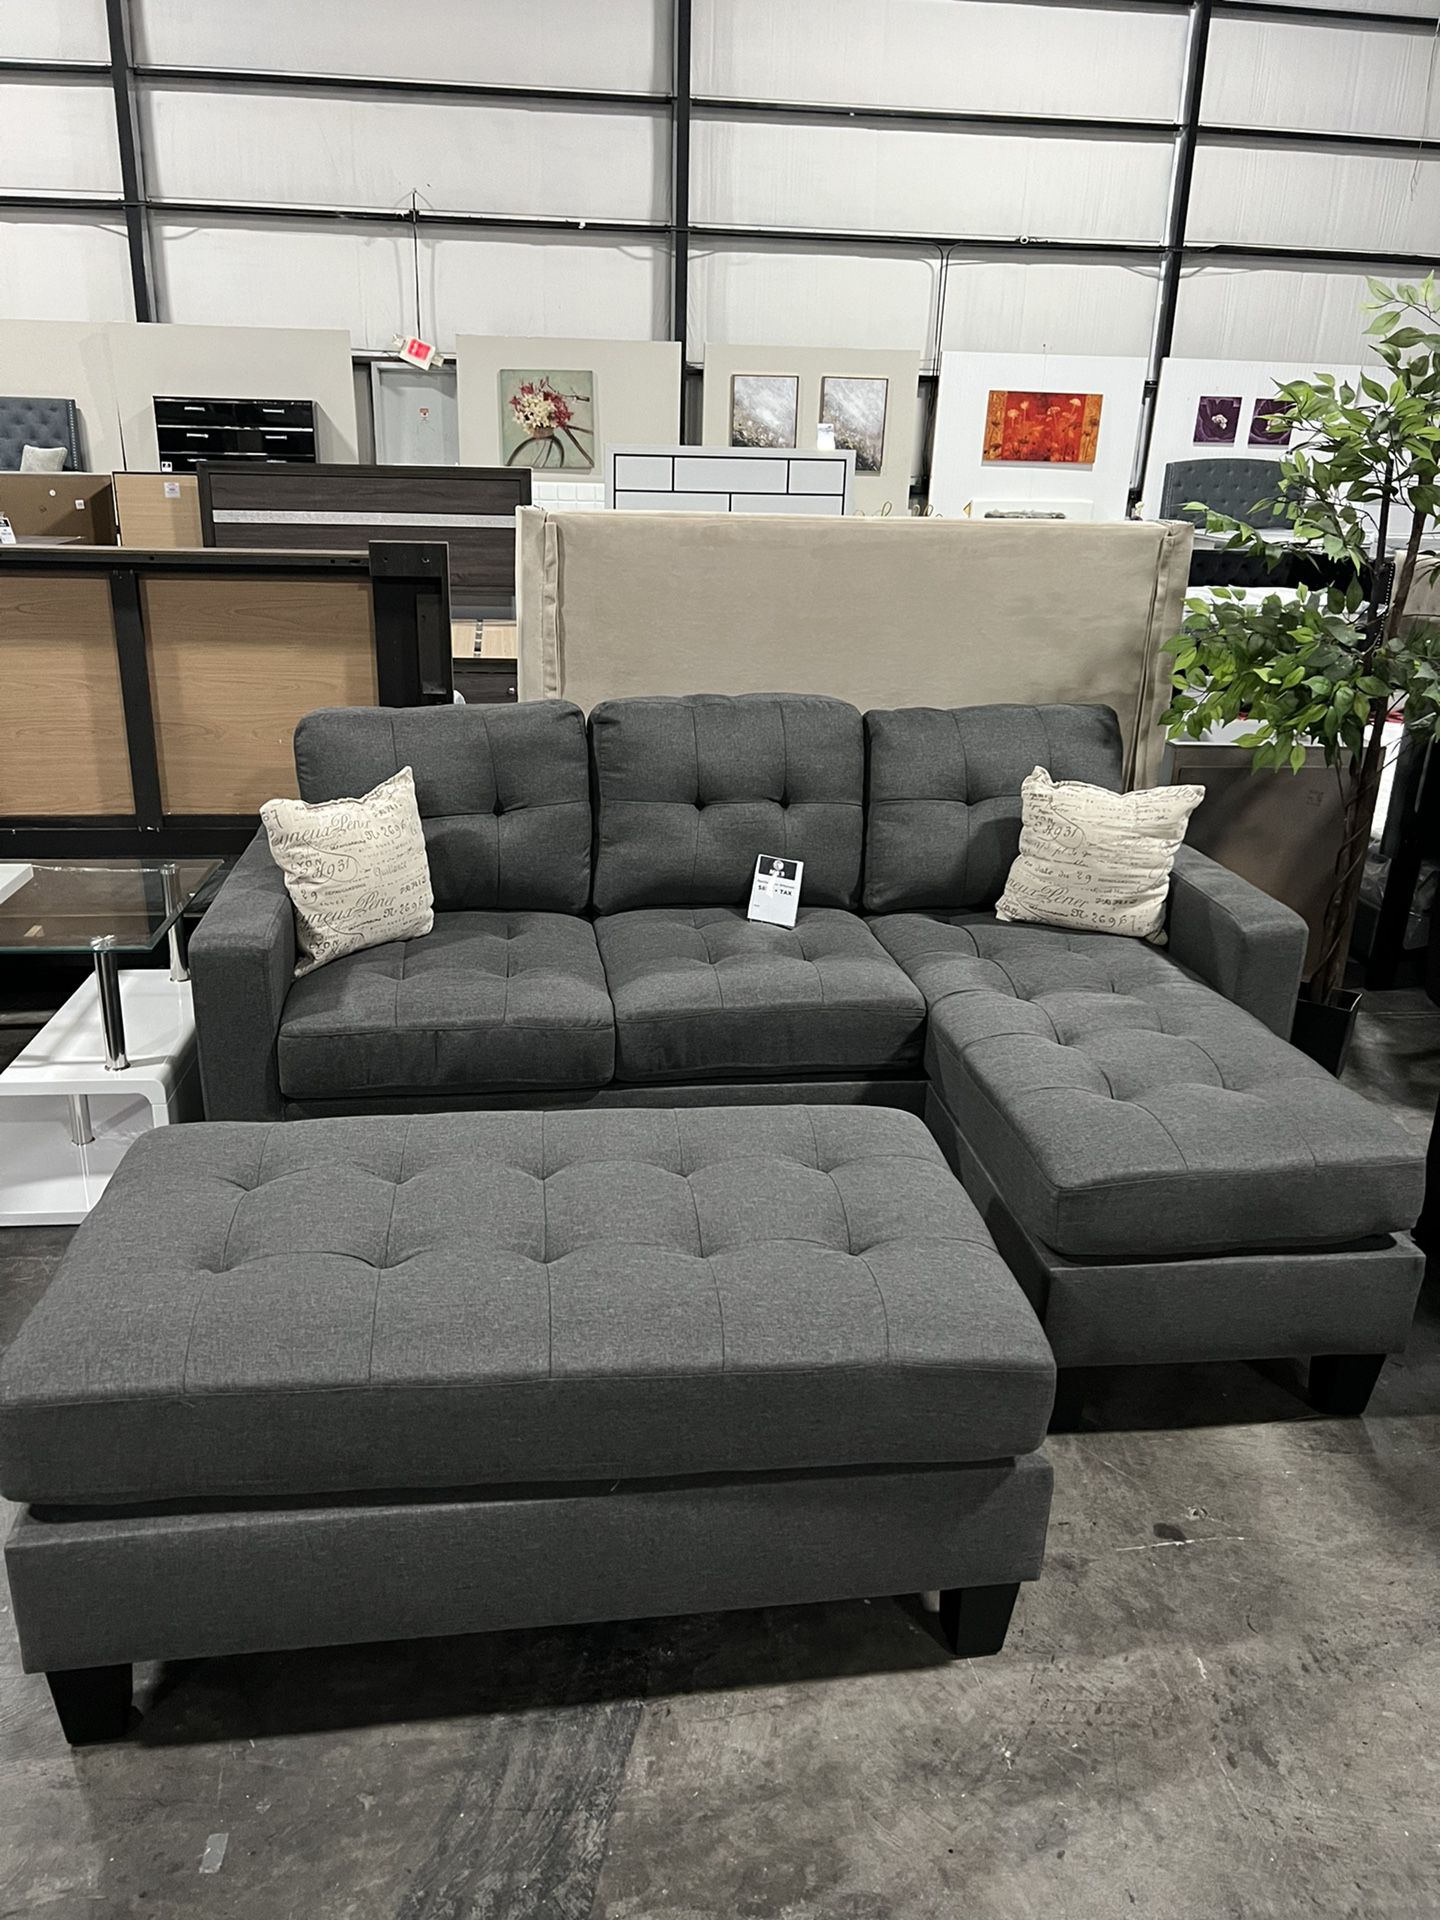 SECTIONAL GREY